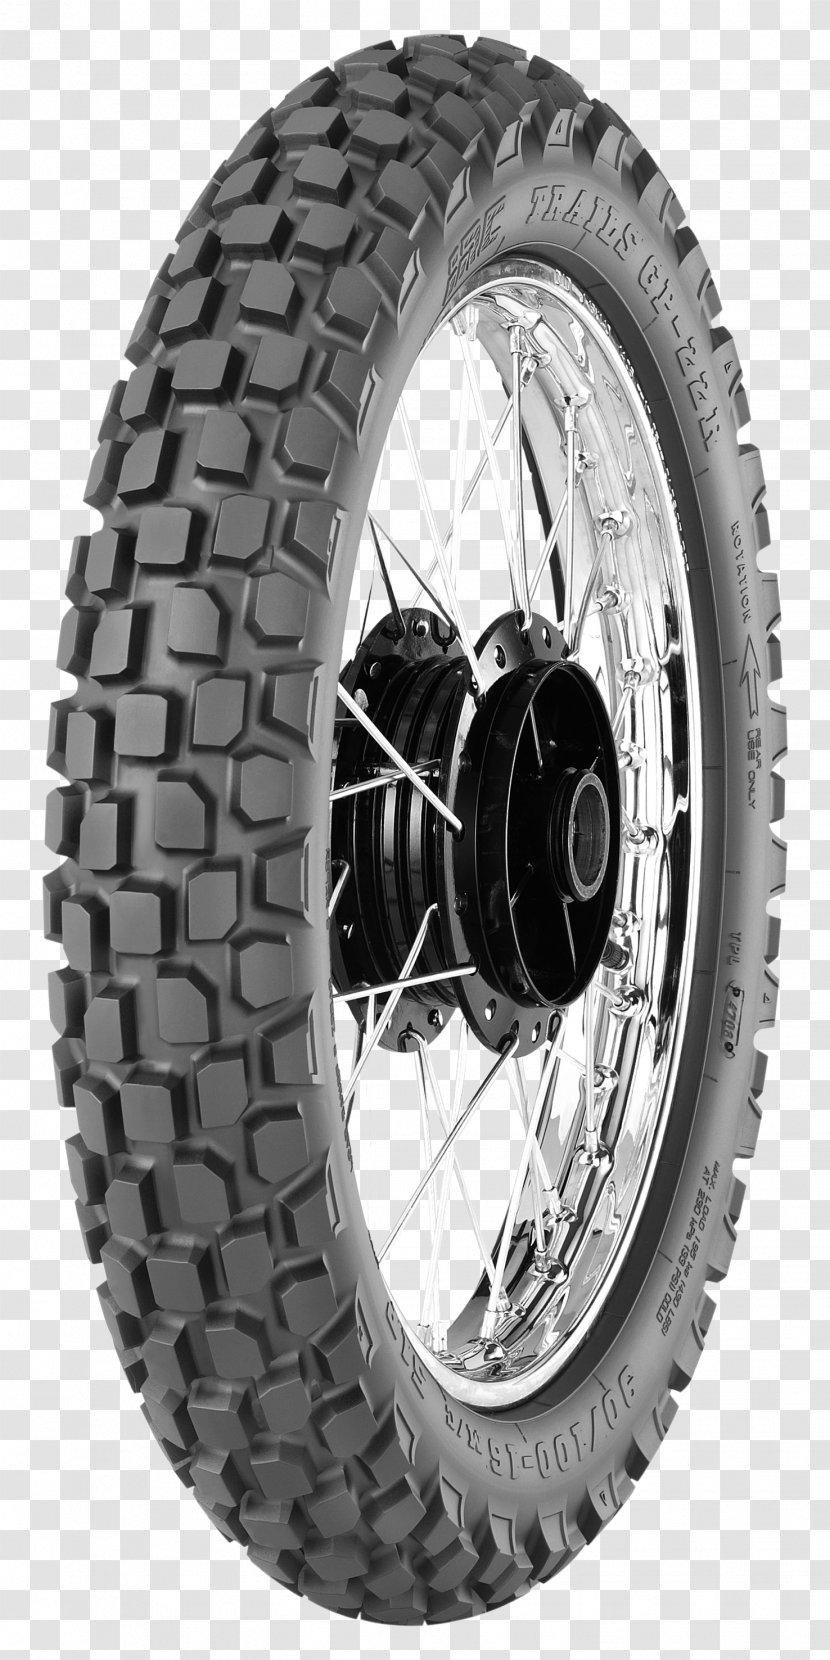 Motorcycle Tubeless Tire Inoue Rubber Pocketbike Racing - Synthetic Transparent PNG